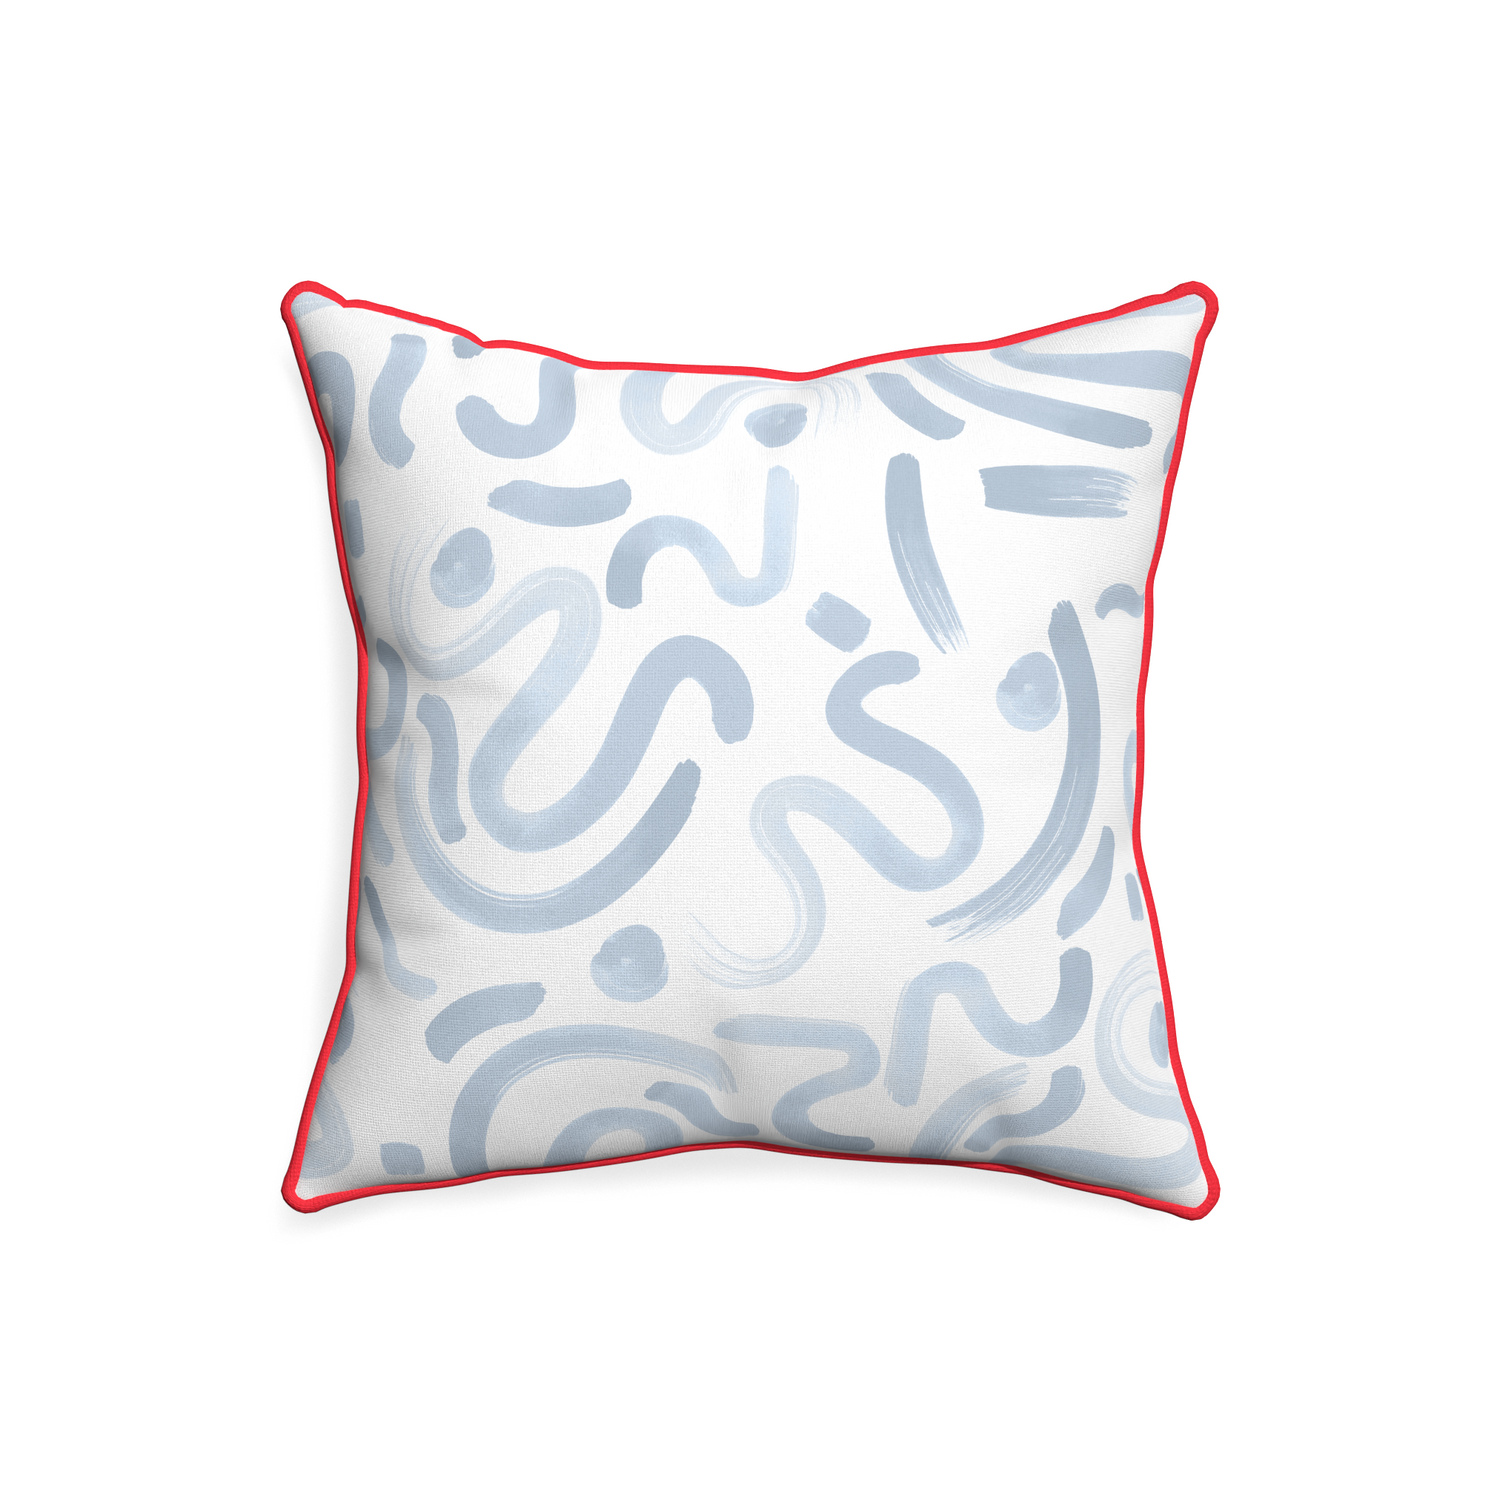 20-square hockney sky custom pillow with cherry piping on white background